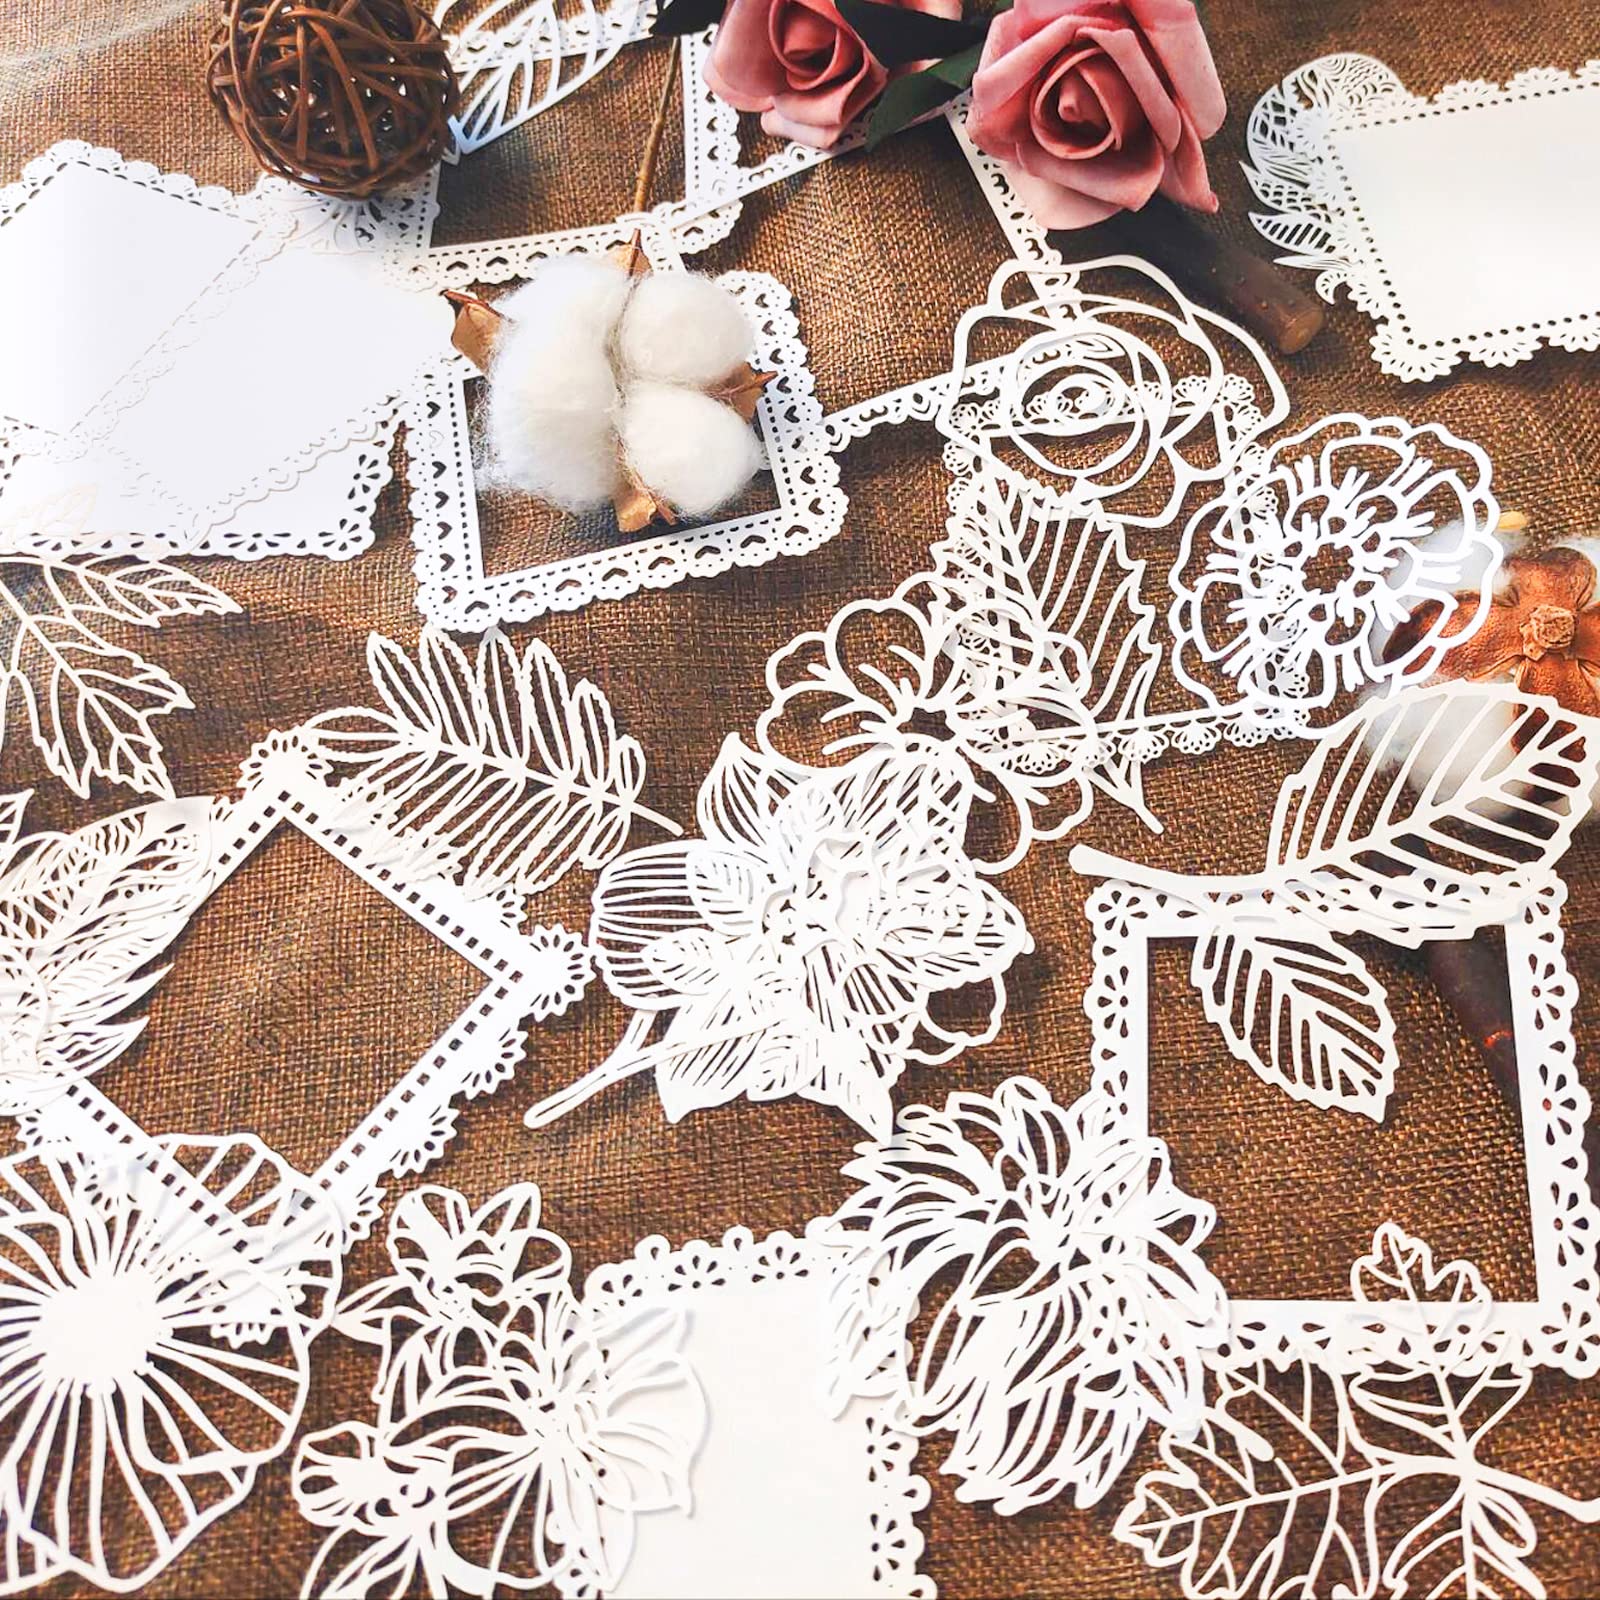  DREMISI 80Pcs Vintage Scrapbooking Supplies Lace Scrapbook  Paper Scrapbook Cutouts Flower Frame Cutout White Black Decorative Paper  Junk Journaling Supplies Aesthetic Stationery Craft Supplies, 4 Pack :  Arts, Crafts & Sewing